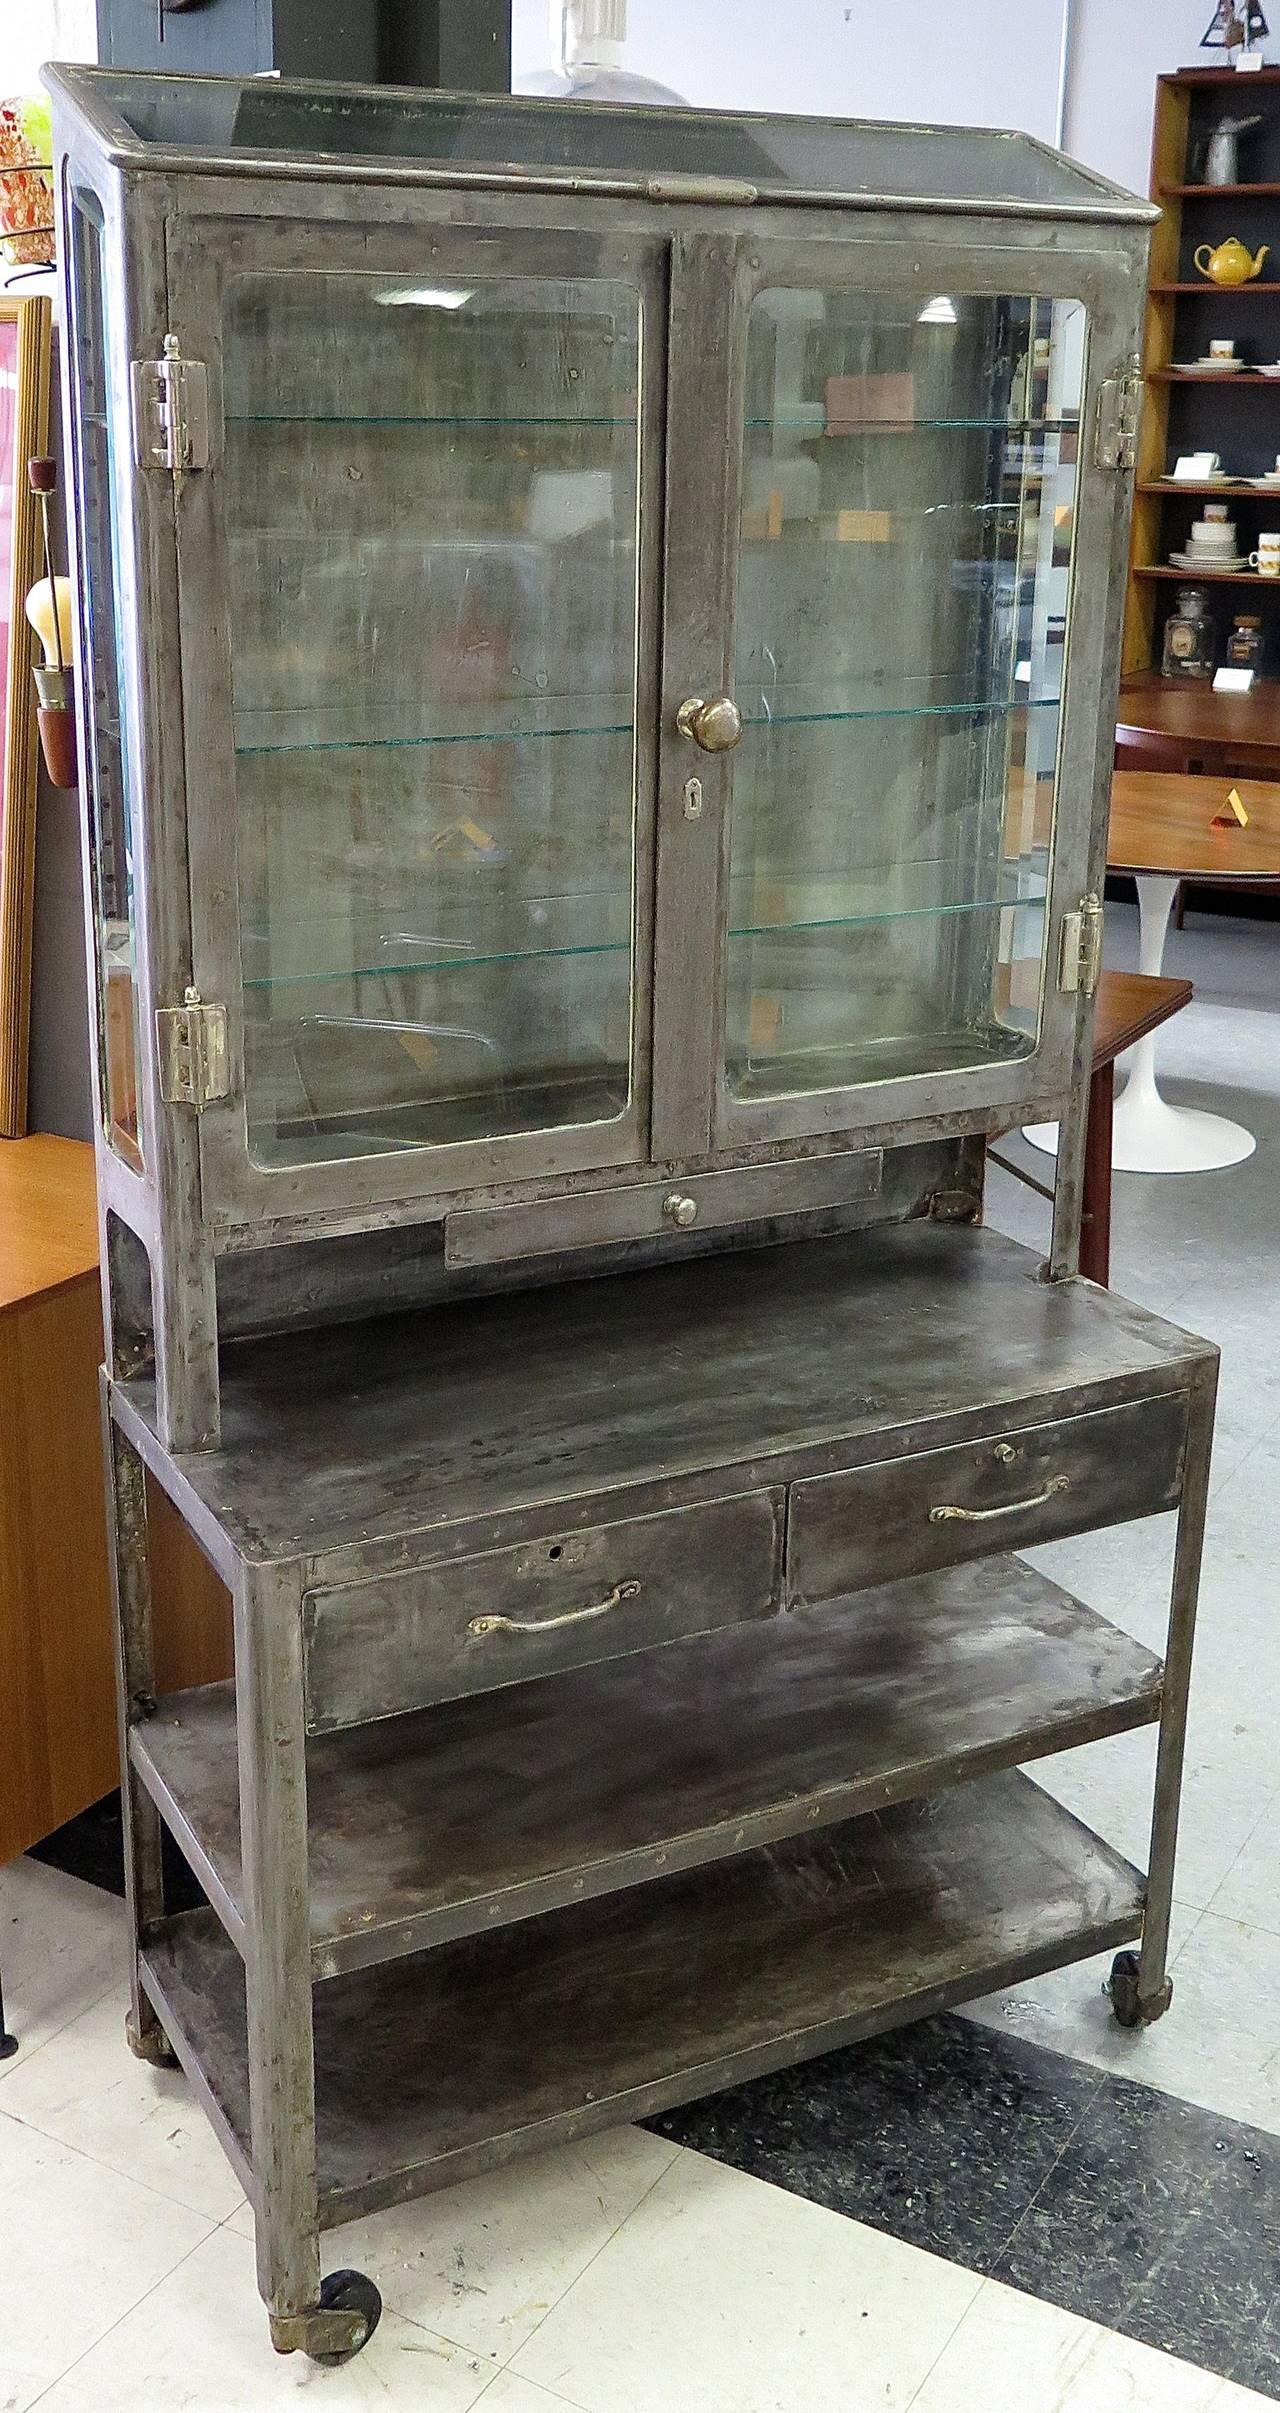 Made in Philadelphia. Steel construction. Nickel hinges and knobs.  All original beveled glass. 3 new glass shelves. New rubber wheels. Has some surface rust. Cabinet was all hand-scraped to its original finish. Great vintage piece!